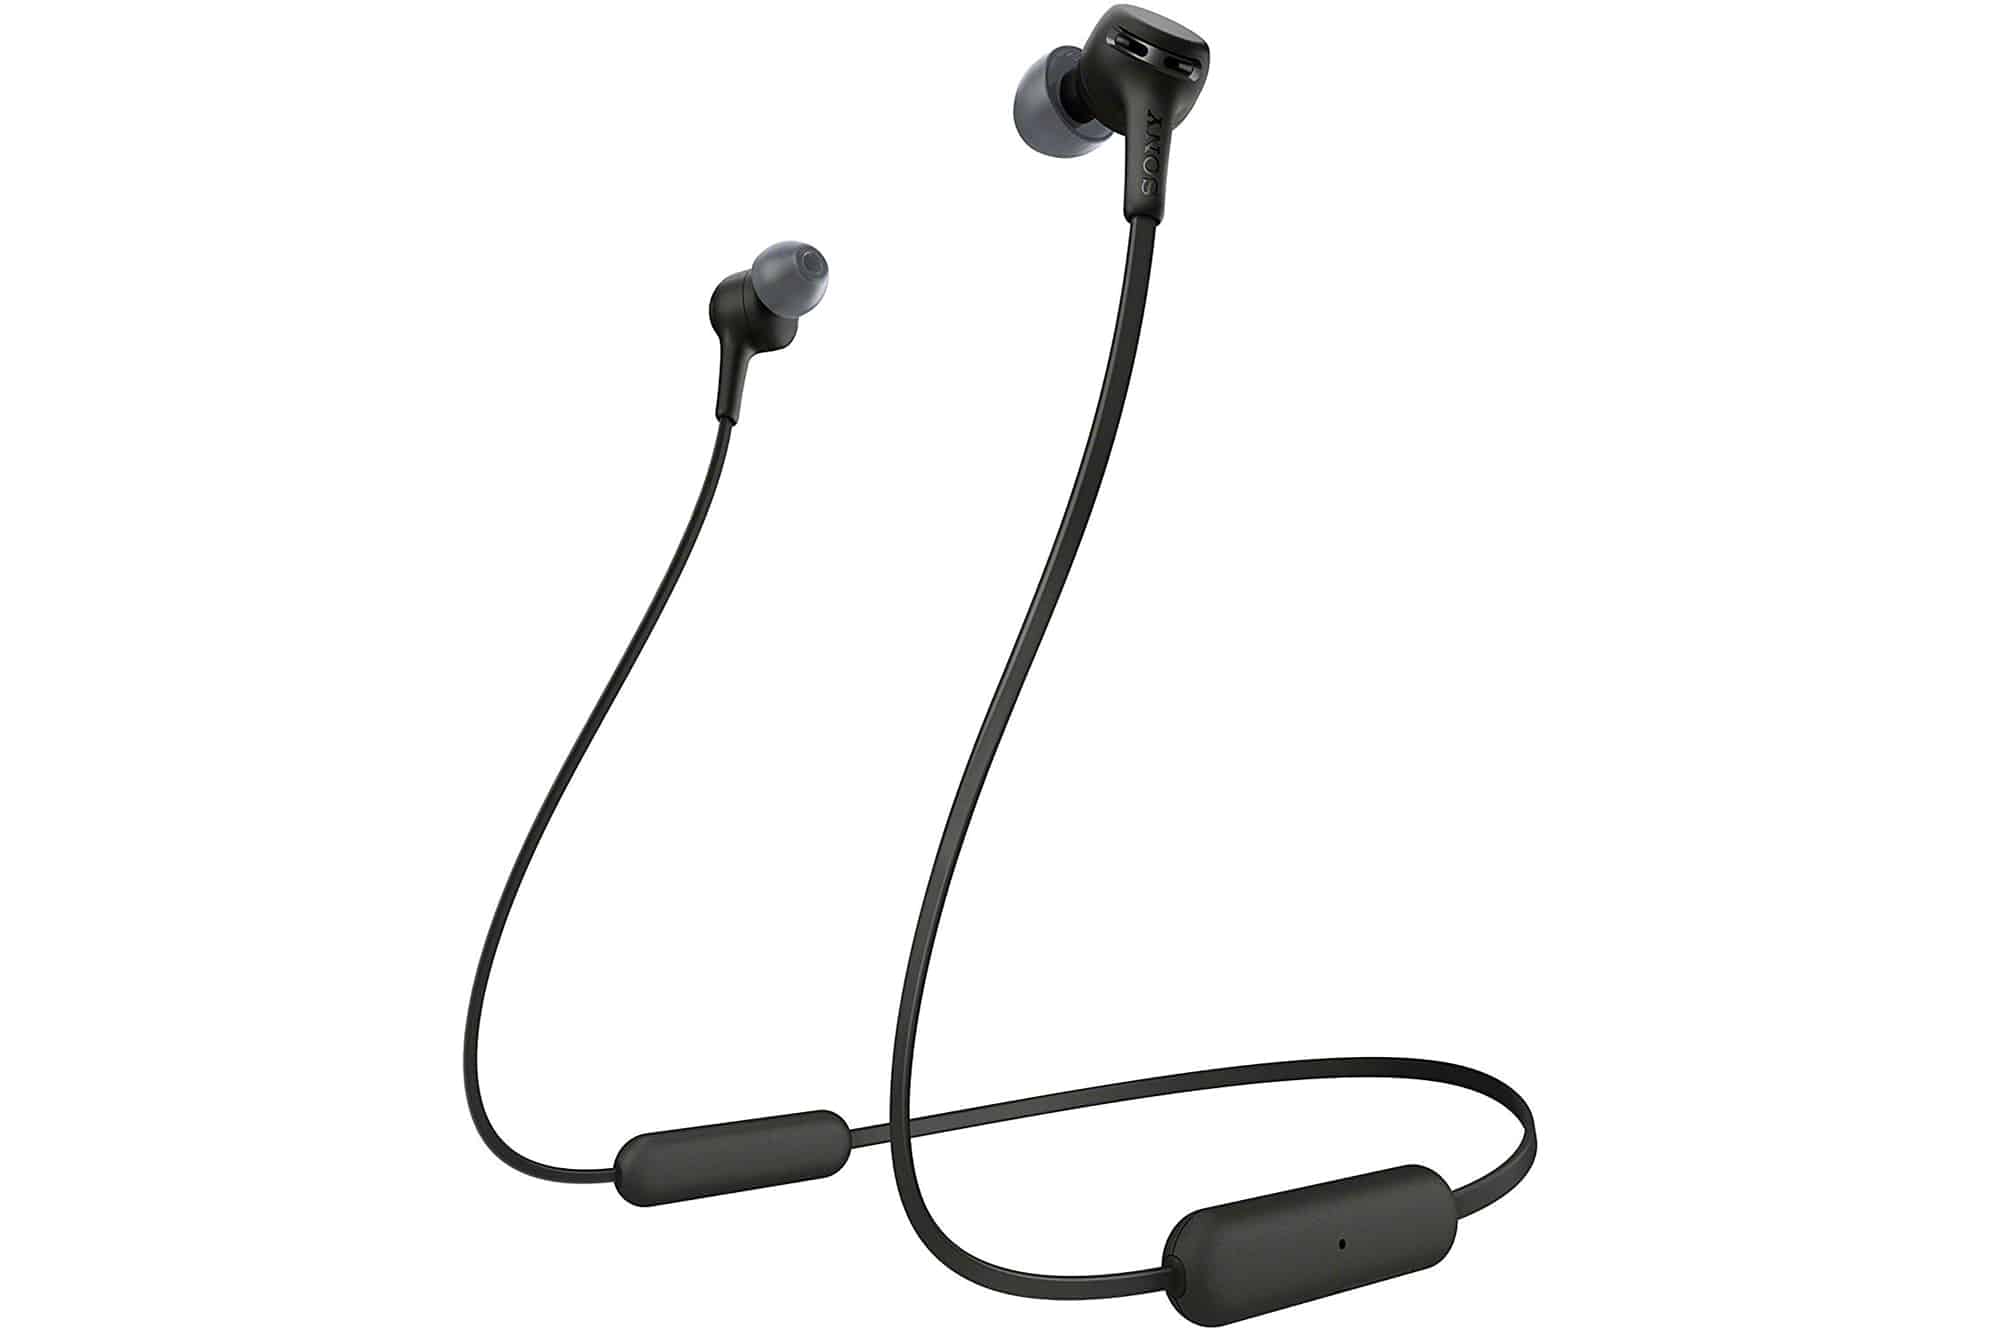 Sony WI-XB400 Wireless In-Ear Extra Bass Headset/Headphones with mic for phone call, Black